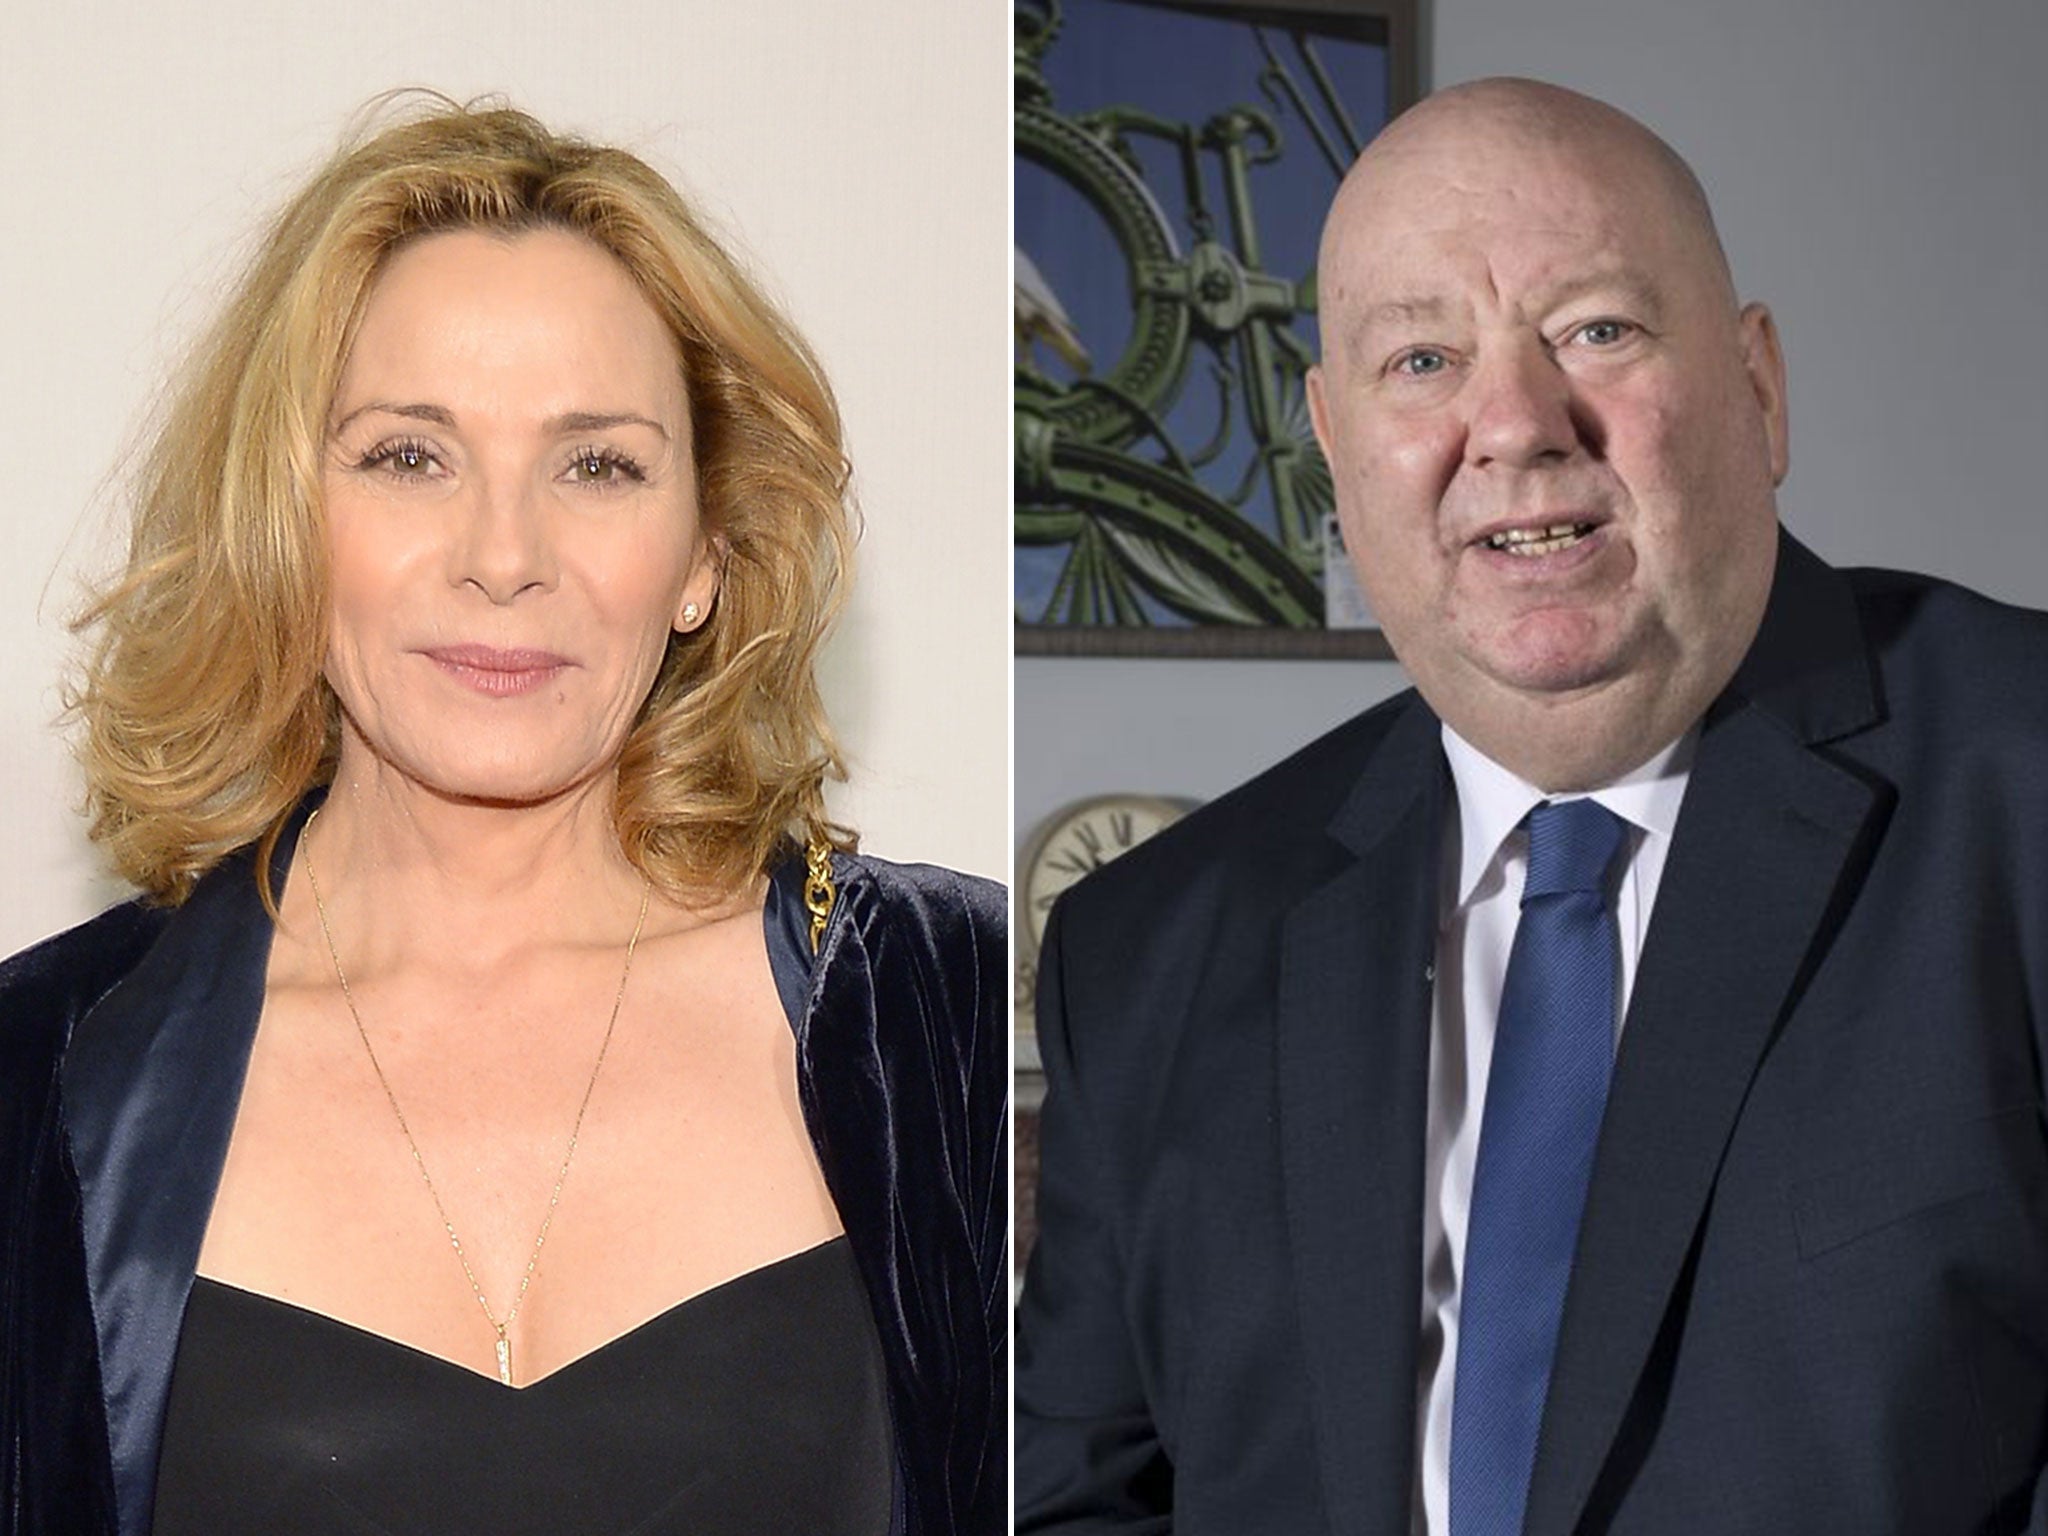 Liverpool-born actress, Kim Cattrall, and Mayor Joe Anderson exchanged insults over the city council’s plan to sell off Sefton Park Meadows